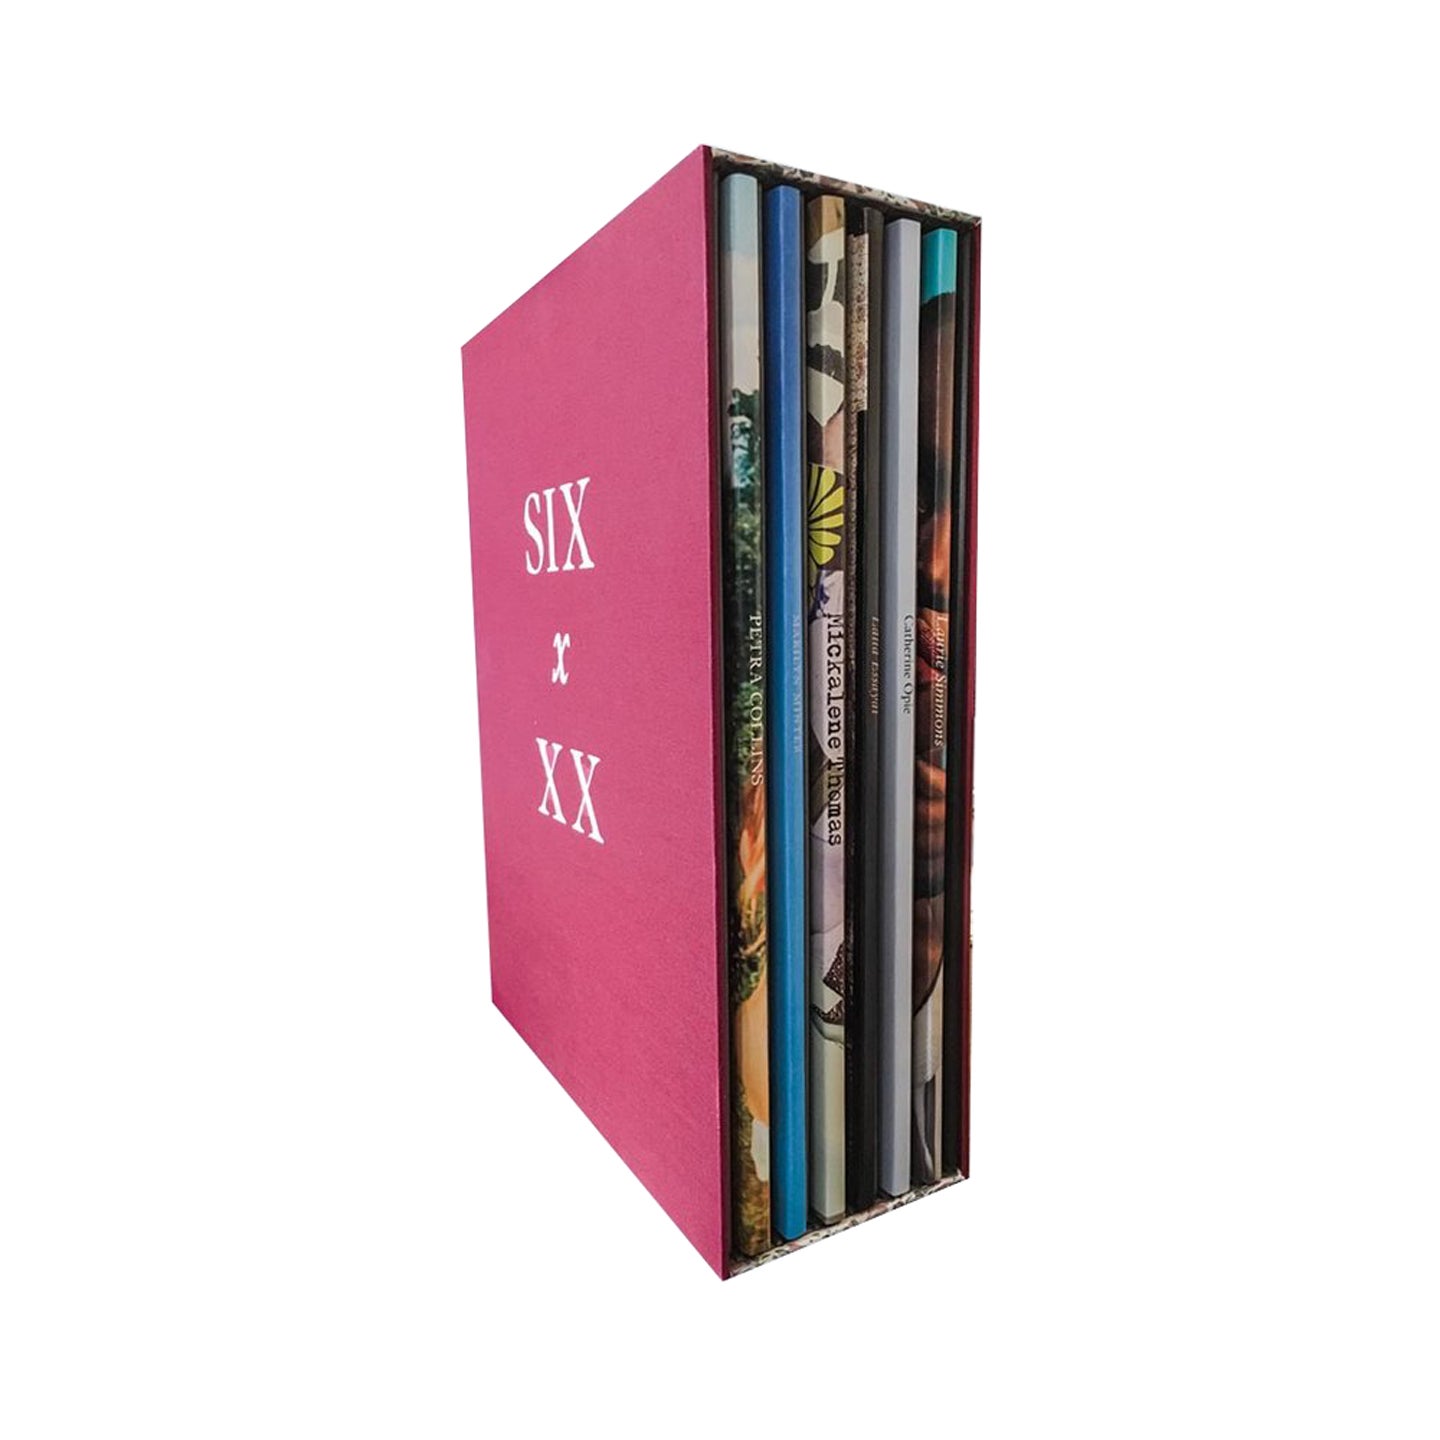 Nazraeli Press Six x XX (6 by XX), Limited Edition(s) (with 6 Prints): Petra Collins: Kamasz Nyar; Lalla Essaydi: Lalla Essaydi; Marilyn Minter: Cunt; Catherine Opie: Girlfriends; Laurie Simmons: How We See ("Doll Girls"); Mickalene Thomas: Black is Beautiful